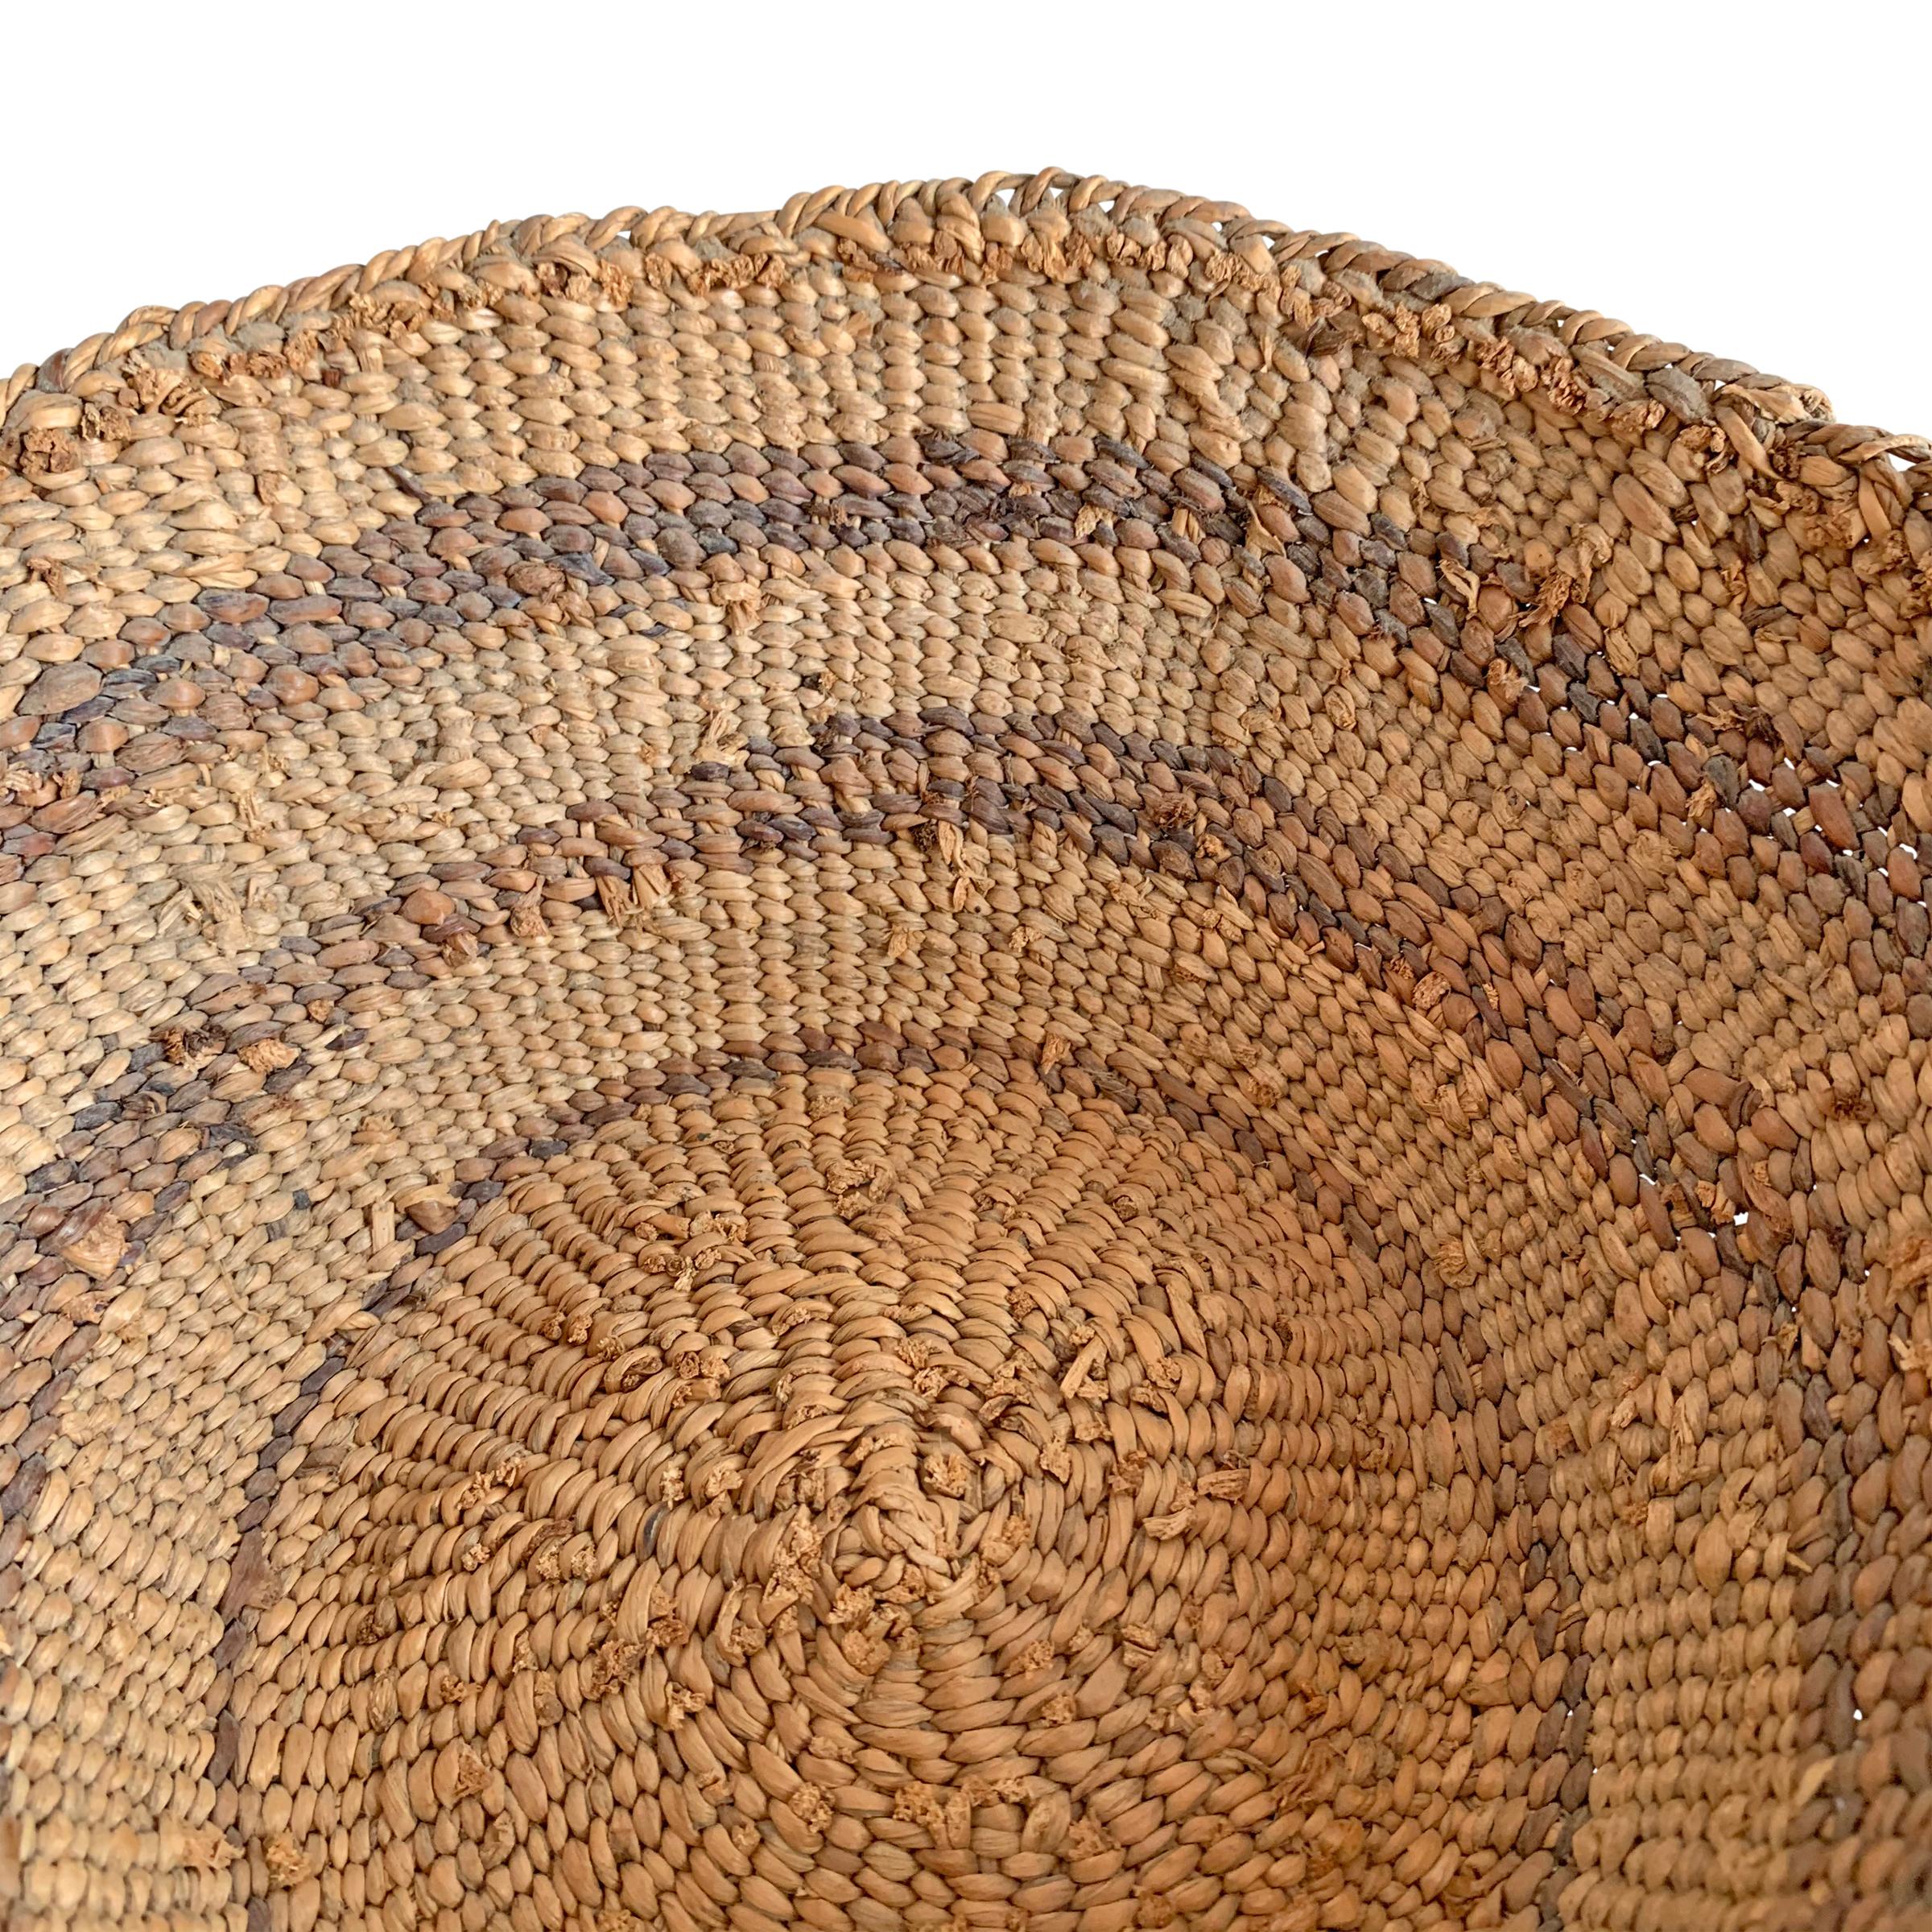 Early 20th Century Pacific NW Native American Basket 5